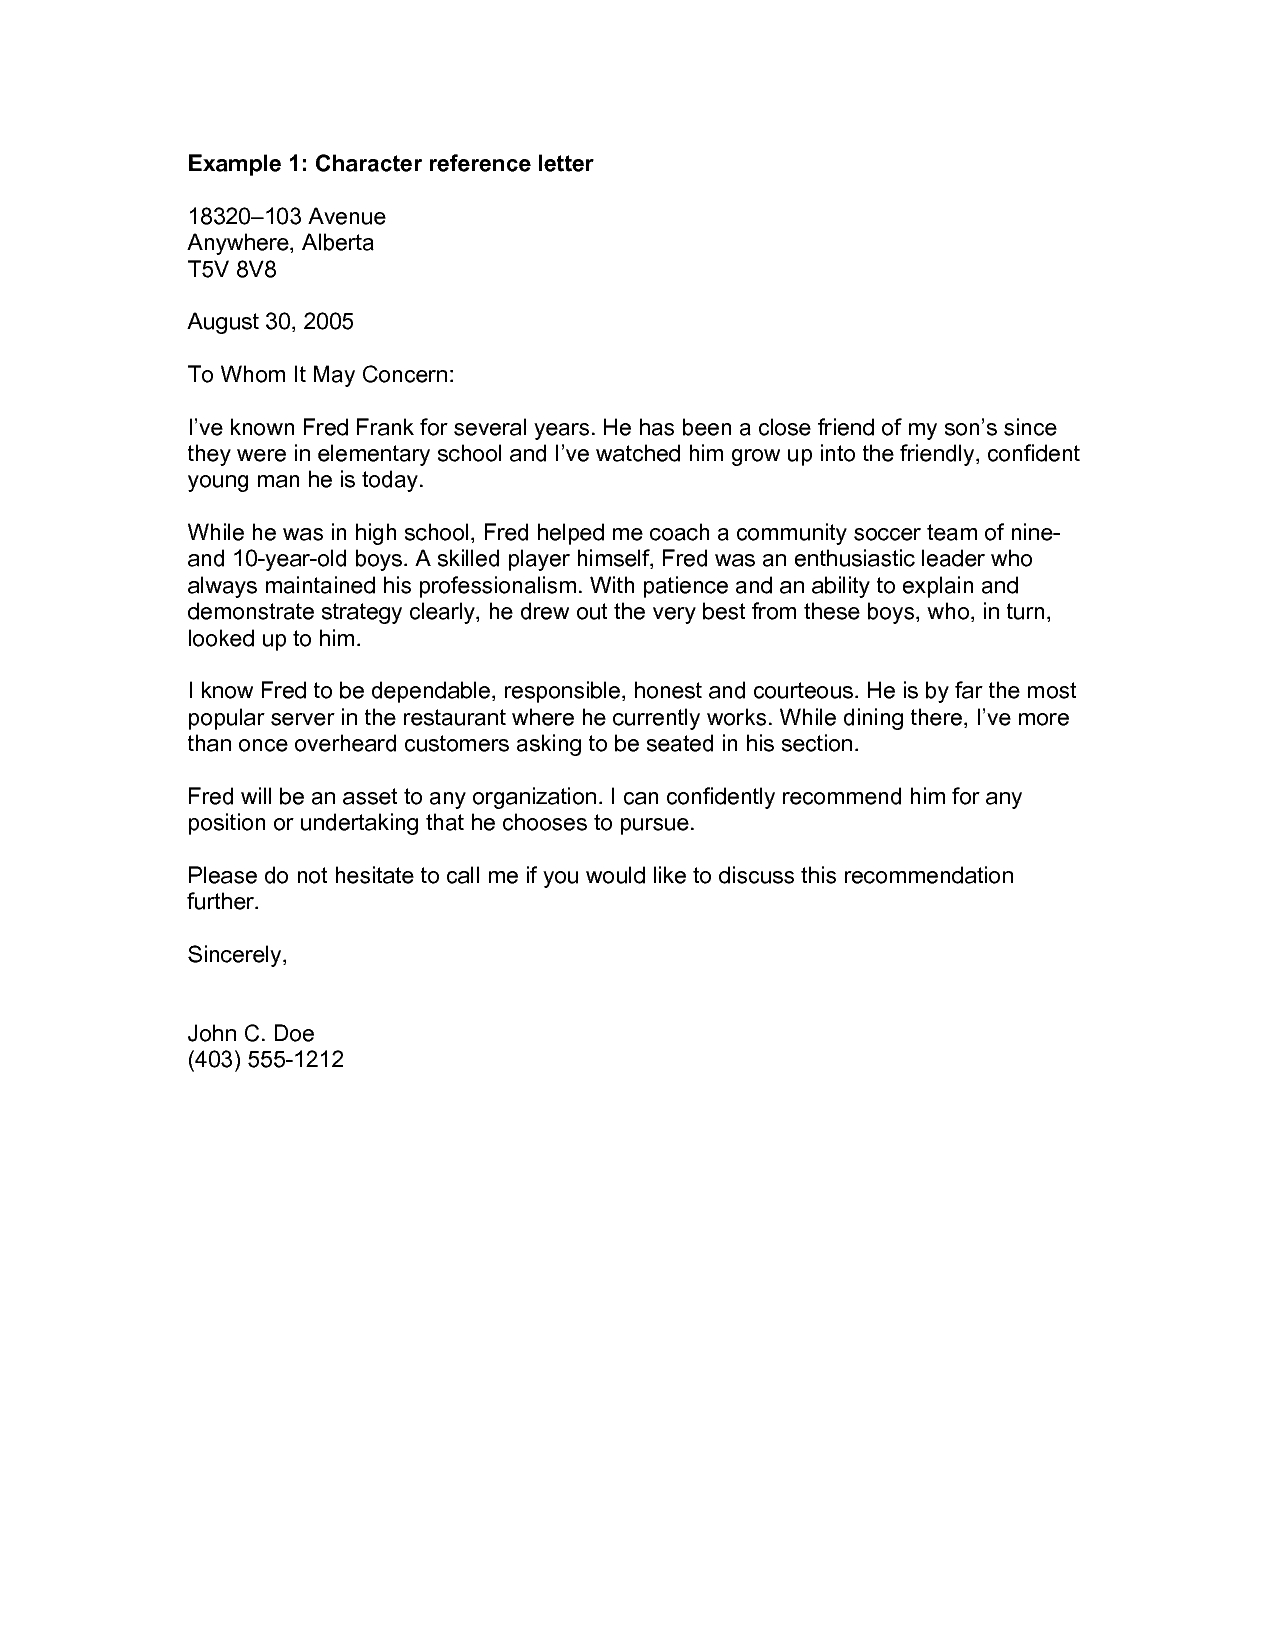 Personal Reference Letter Of Recommendation For Friend inside size 1275 X 1650